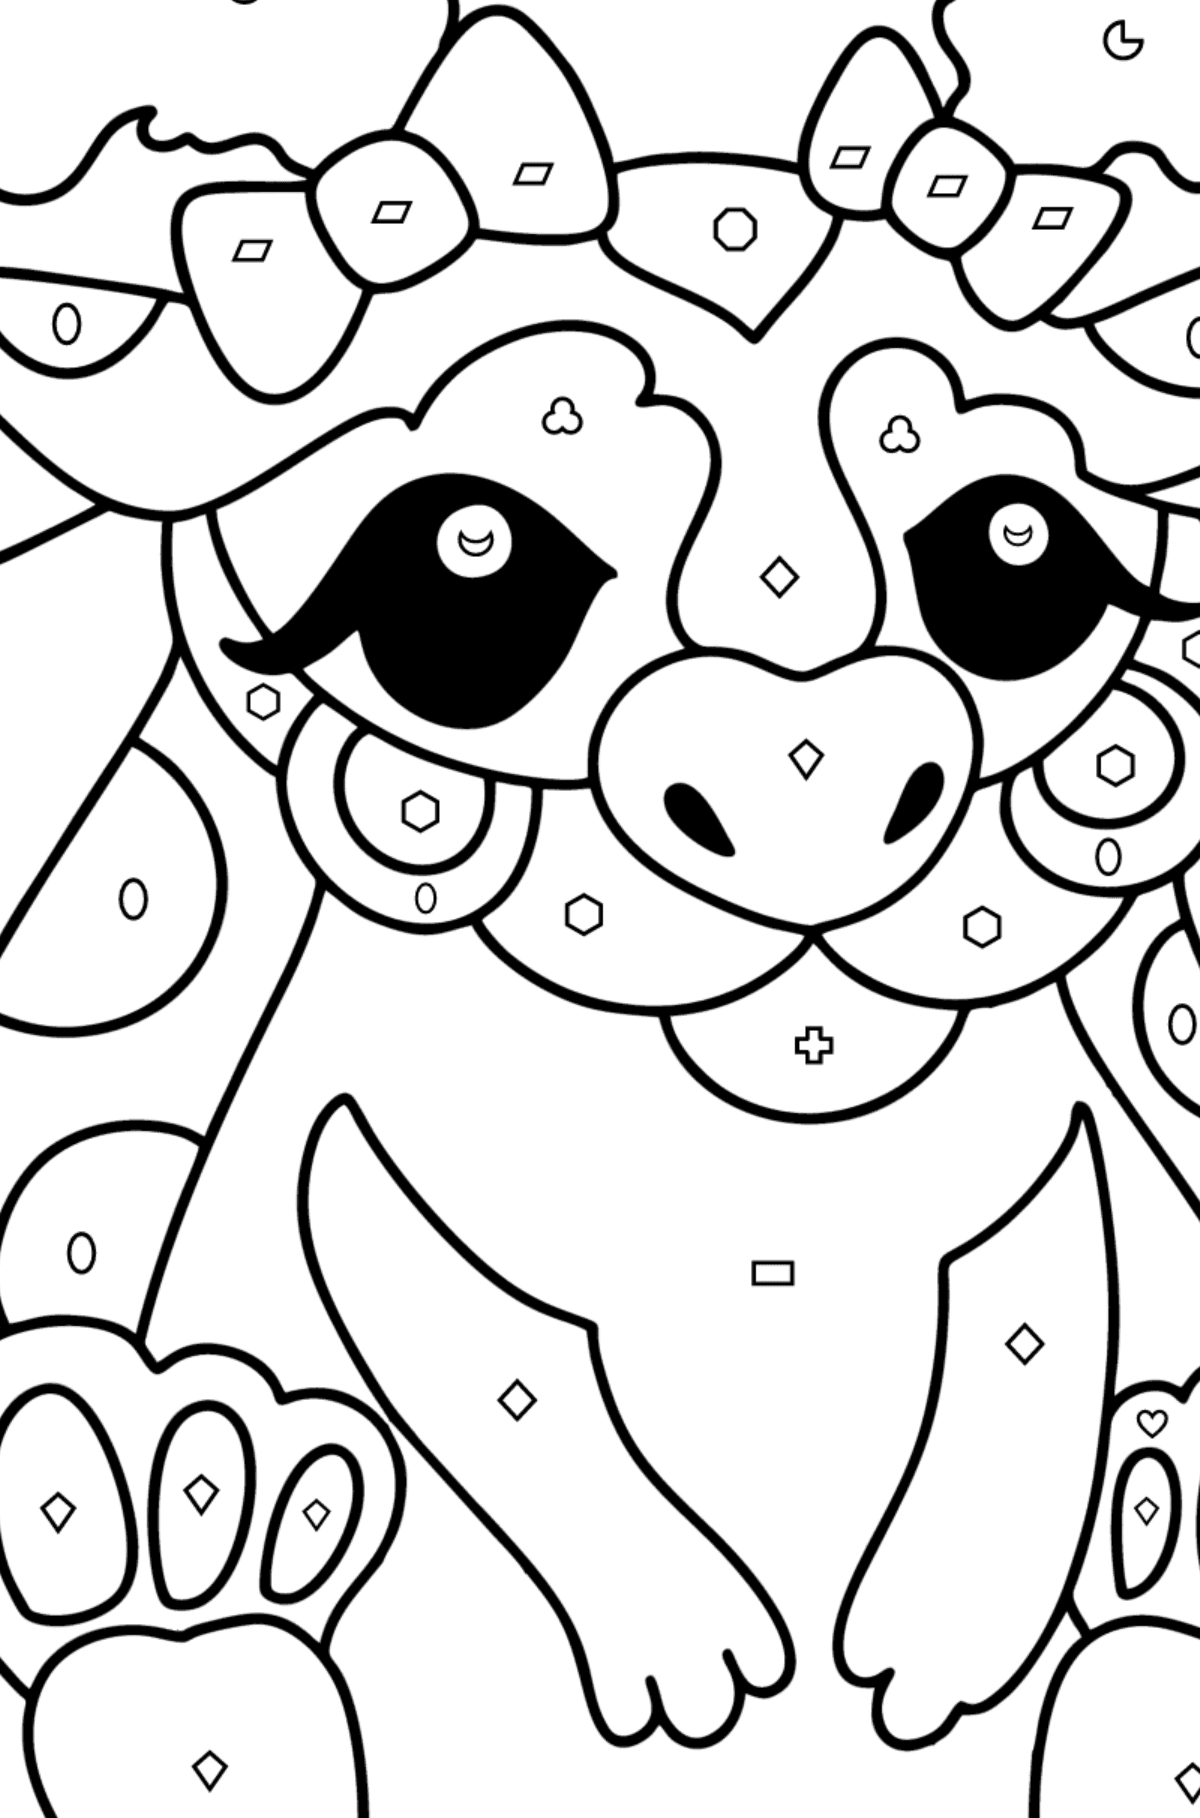 Dragon girl coloring page - Coloring by Geometric Shapes for Kids